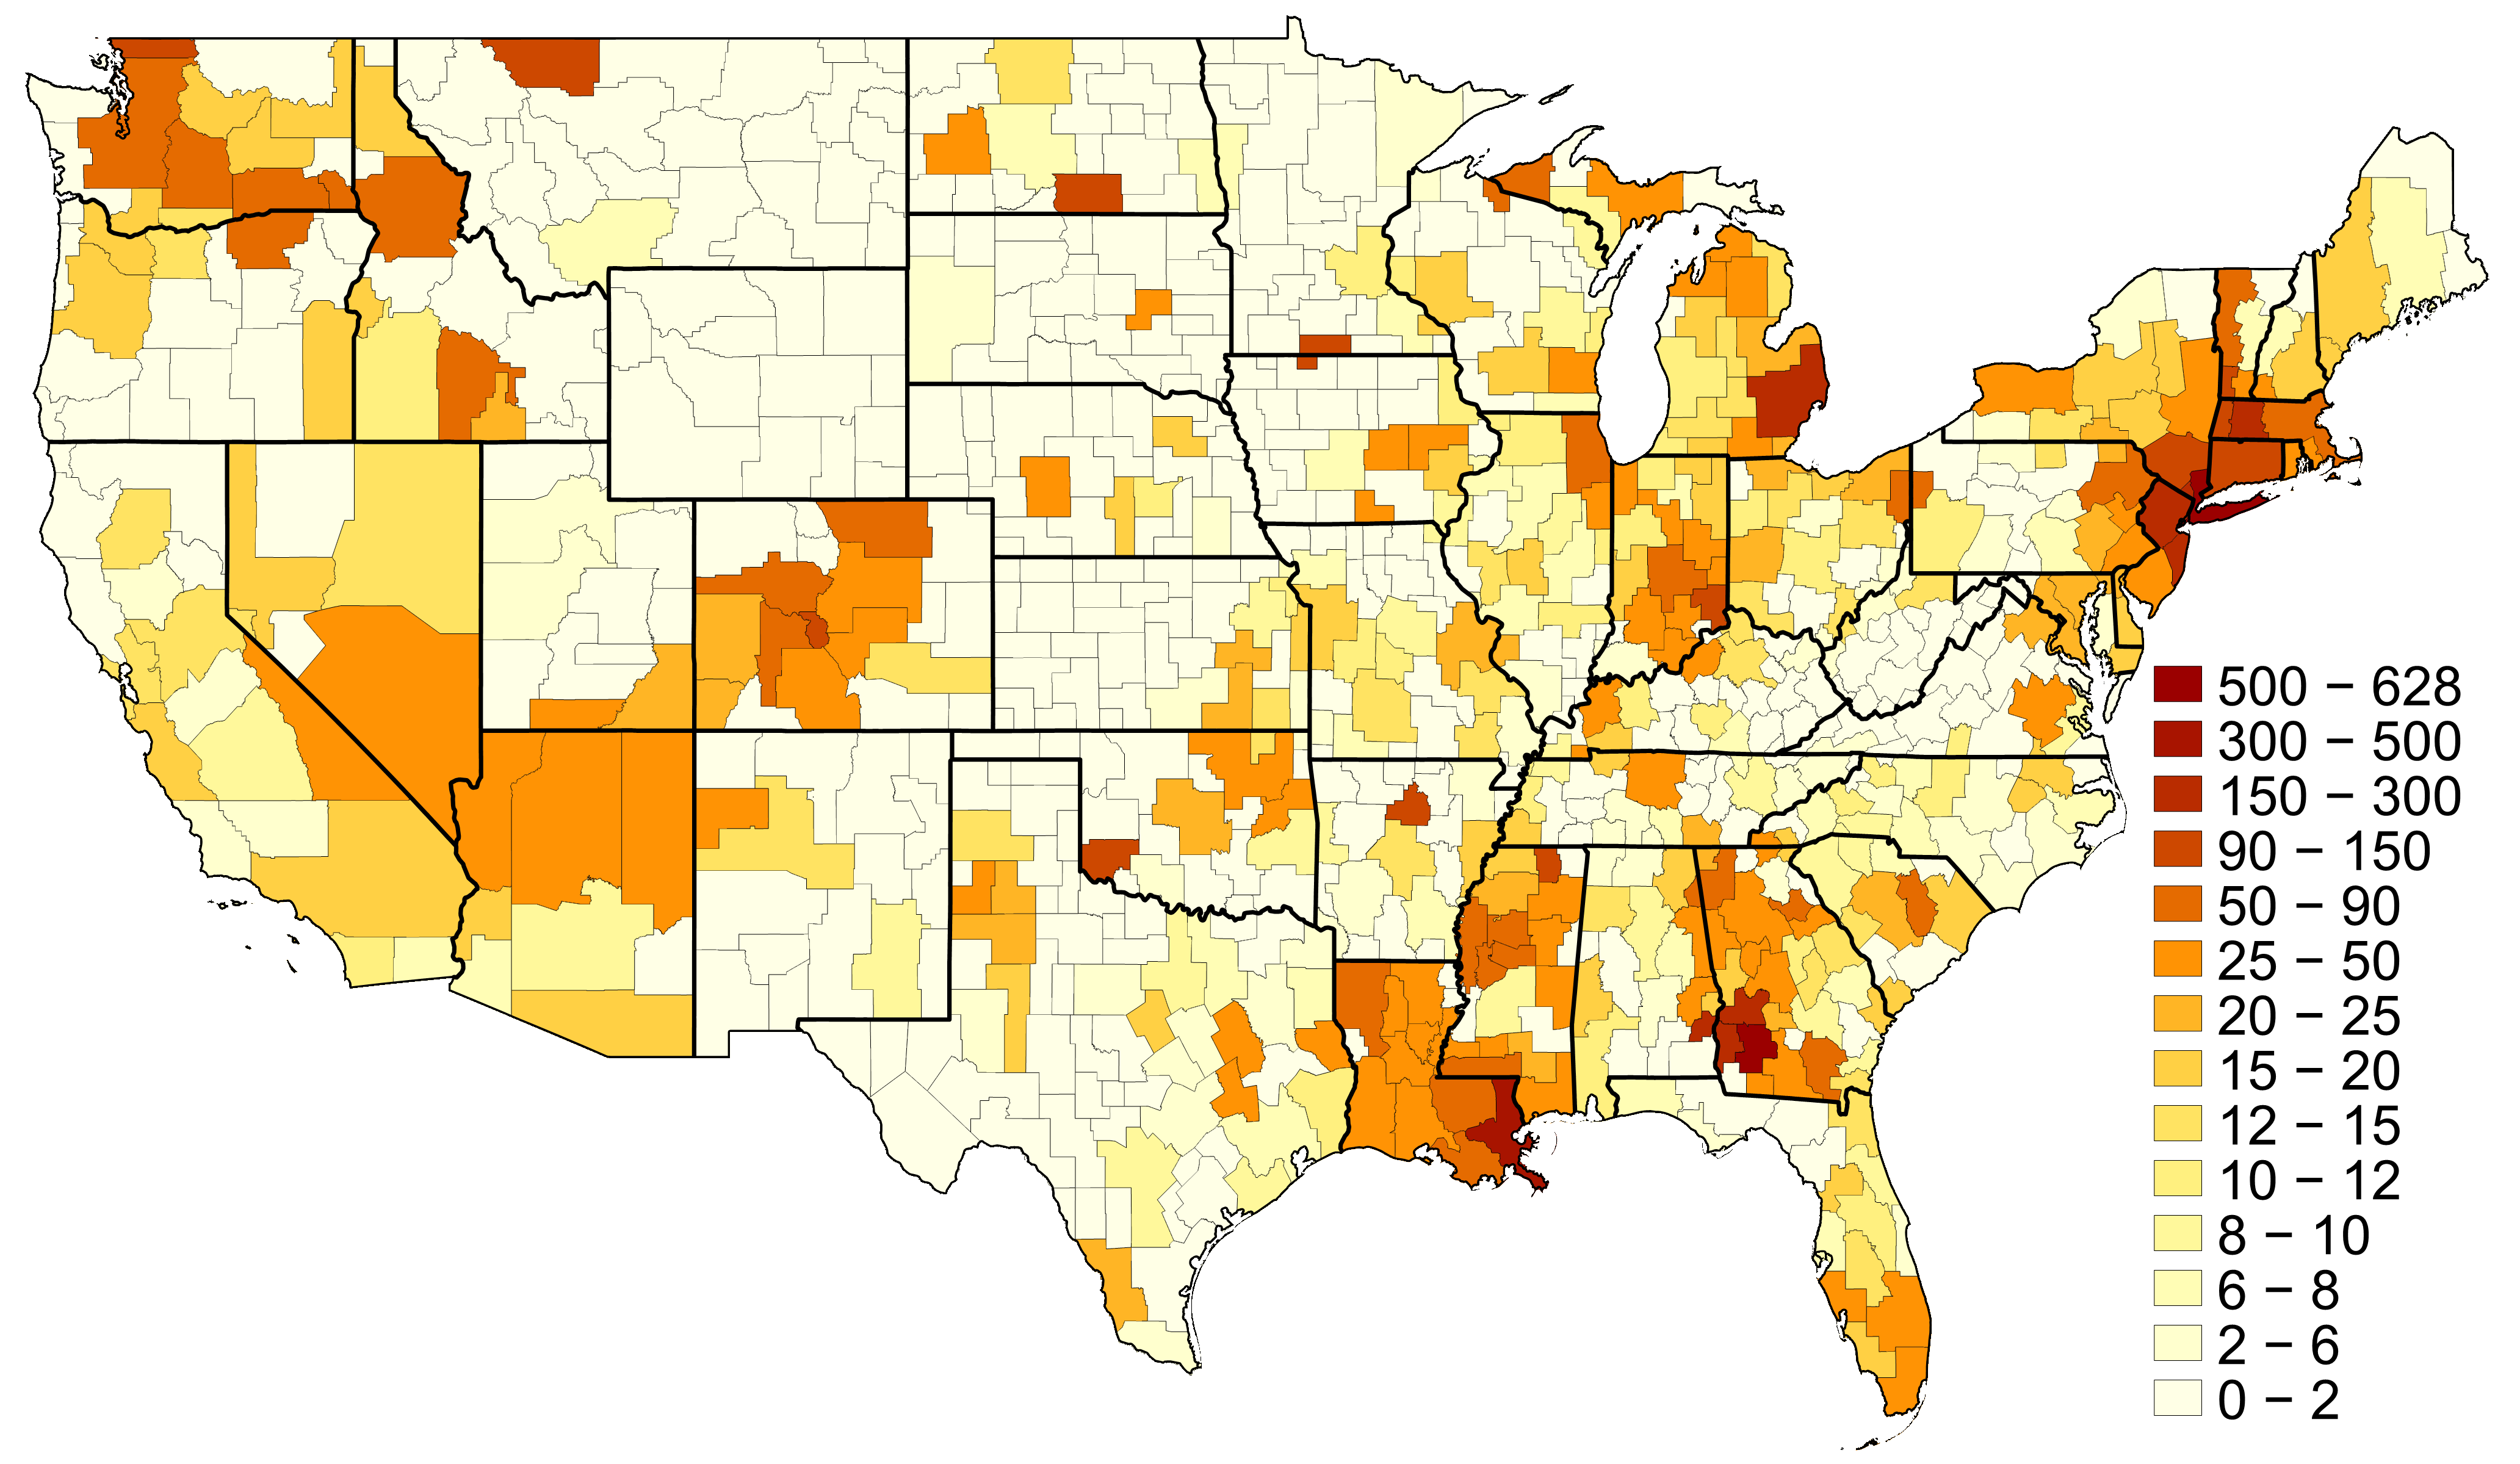 Heat map of the United States showing deaths per million people across u.s. commuting zones